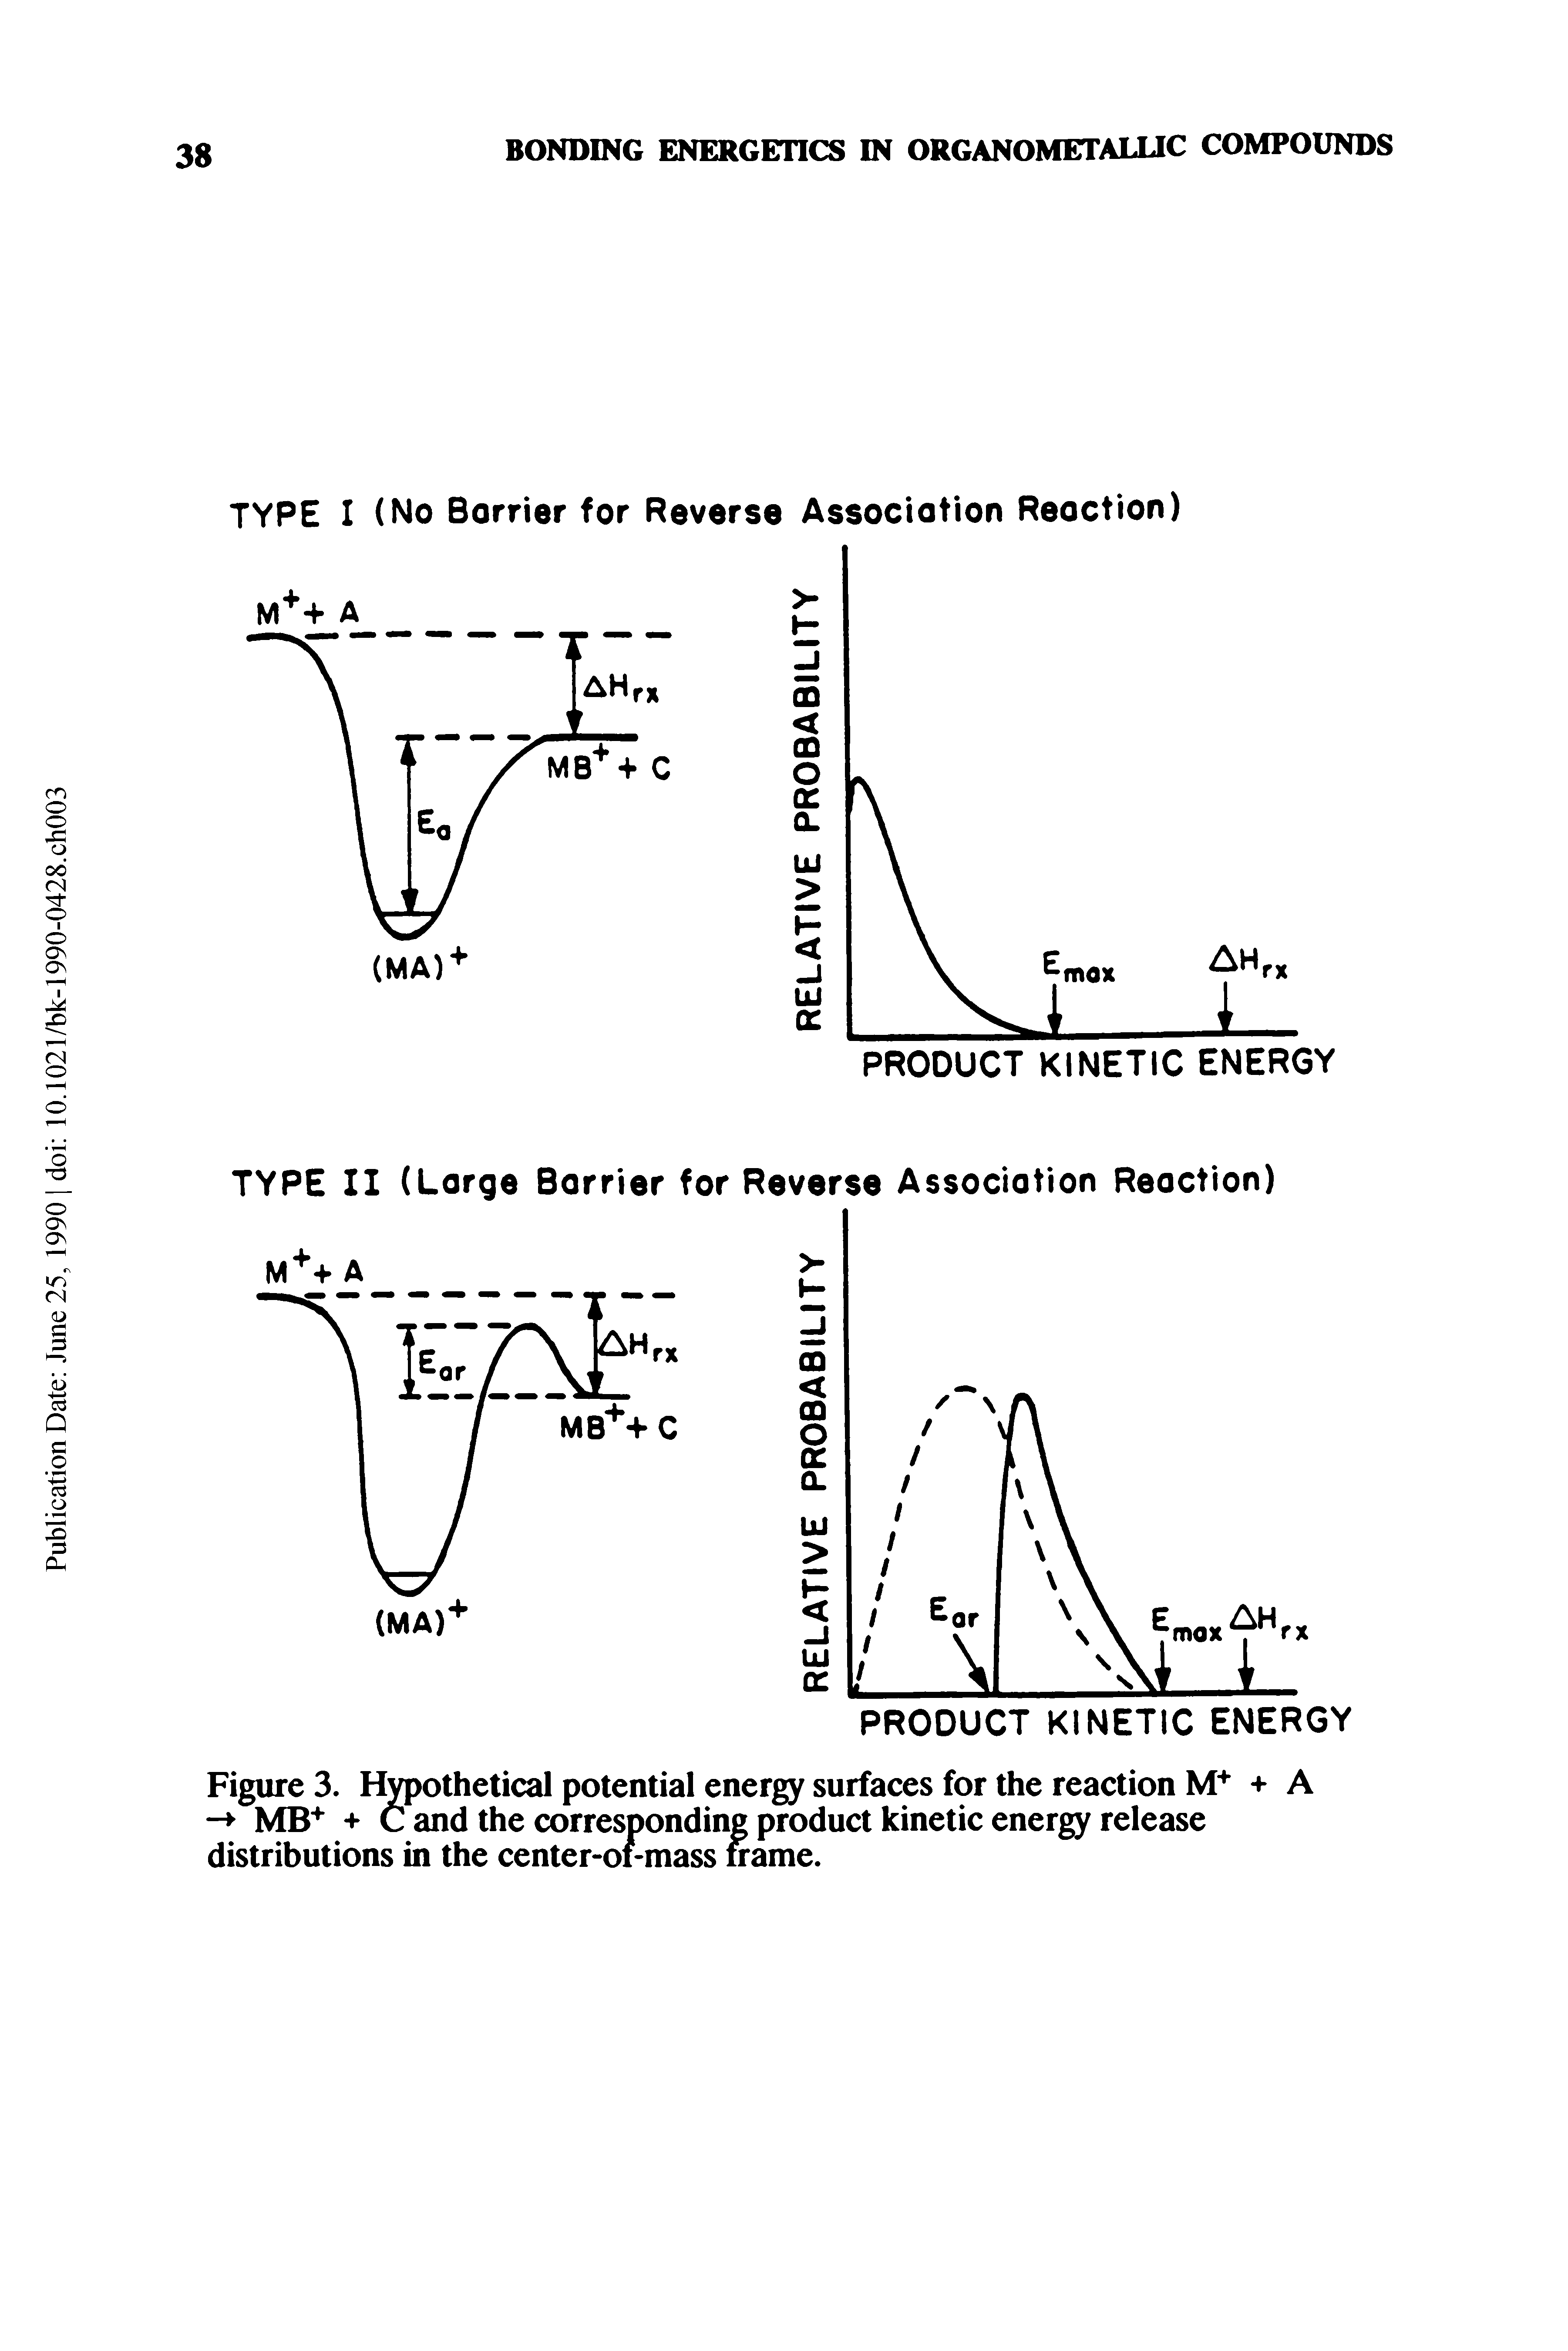 Figures, t othetical potential energy surfaces for the reaction M+ + A + C and the corresponding product kinetic energy release distributions in the center-oi-mass fiame.